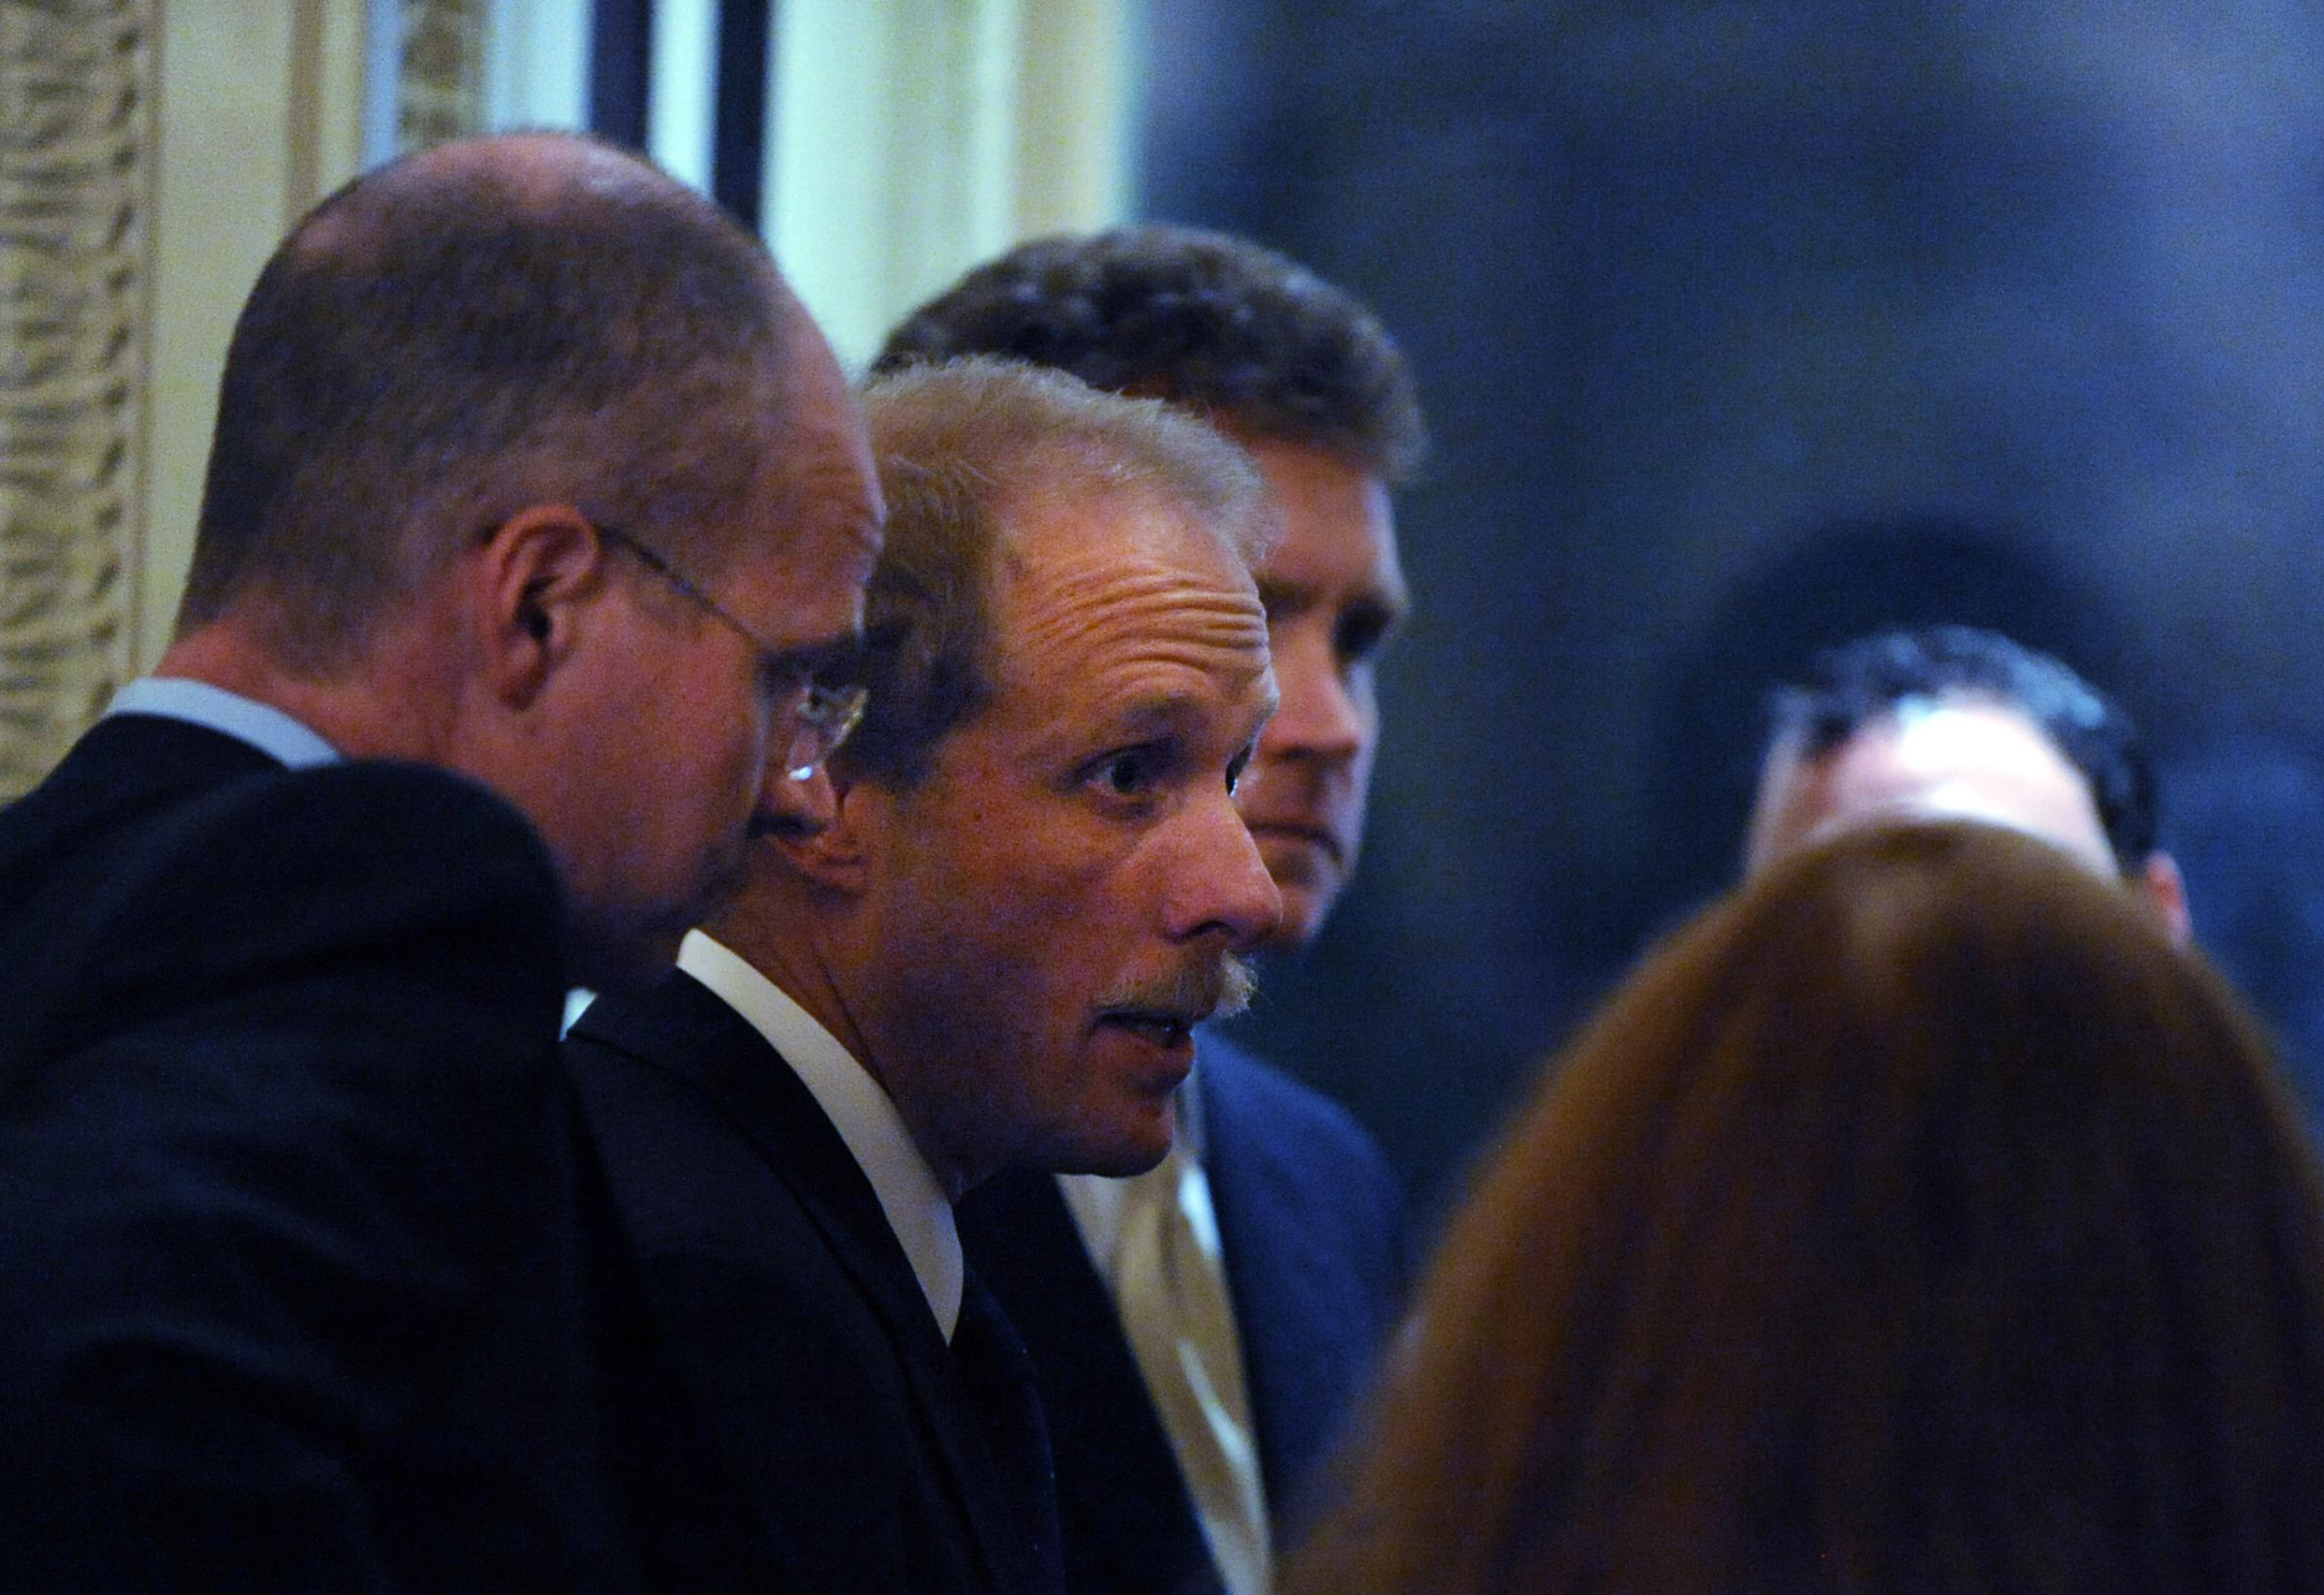 Stephen Feinberg (second from left), a participant in the auto bailout deal, convenes with his crew as lawmakers discuss the auto bailout bill at the US Capitol in Washington on Dec. 11, 2008.